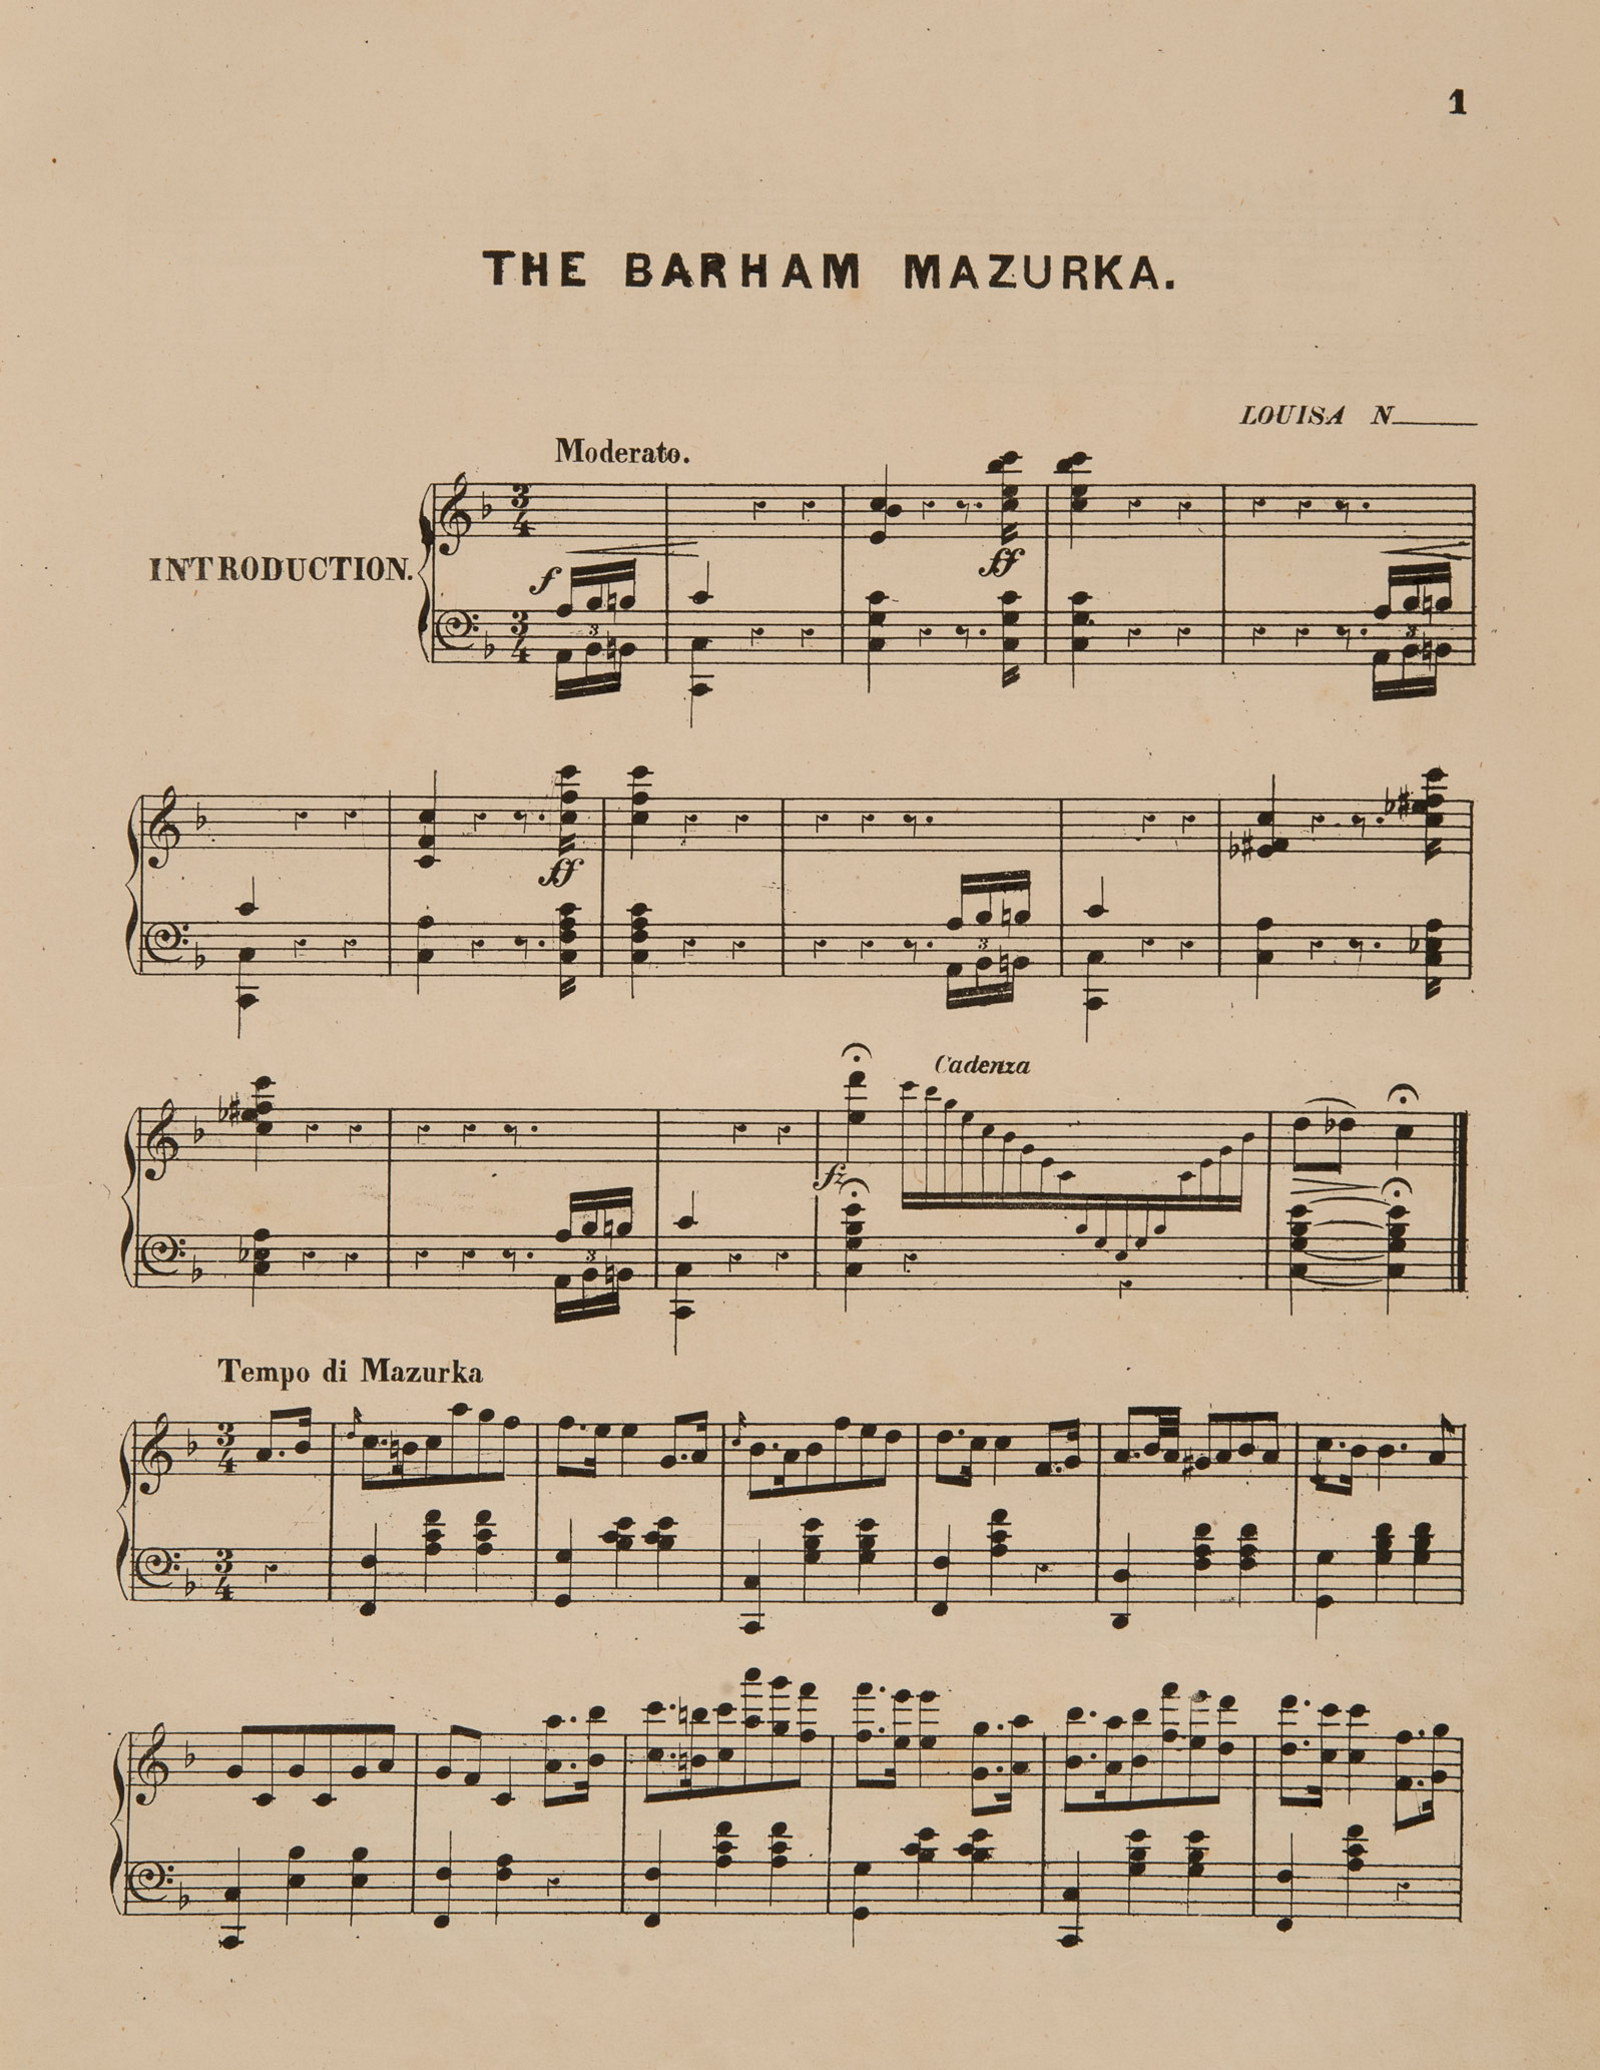 Sheet music, 'The Barham Mazurka', composed by Louise N, page 1, published 1876